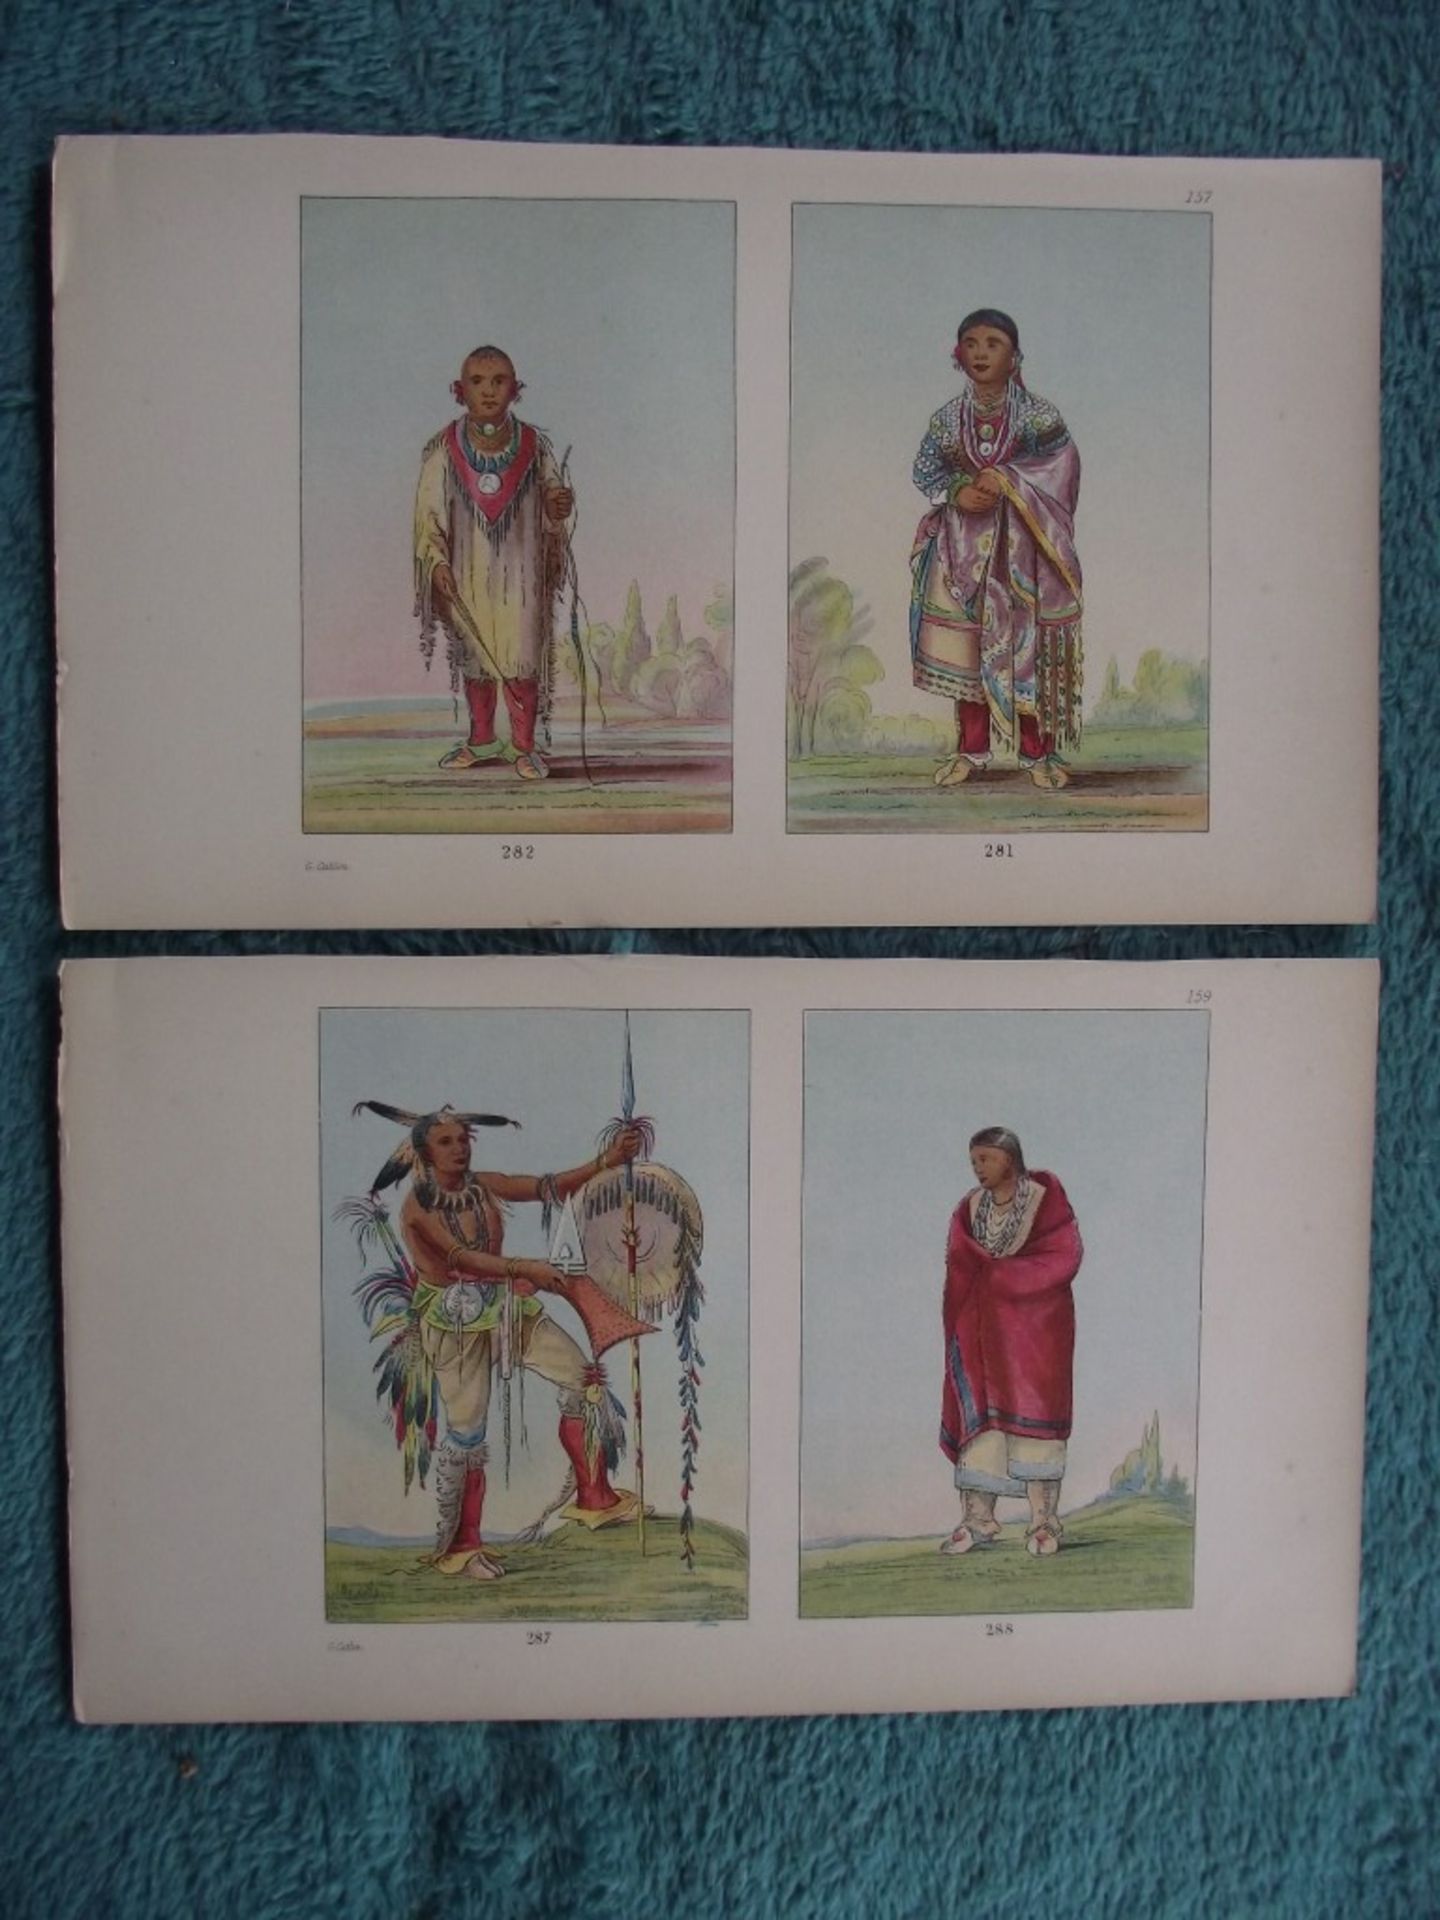 65 X book plates - George Catlin - Illustrations of the North American Indians - Circa 1876 - Image 11 of 40